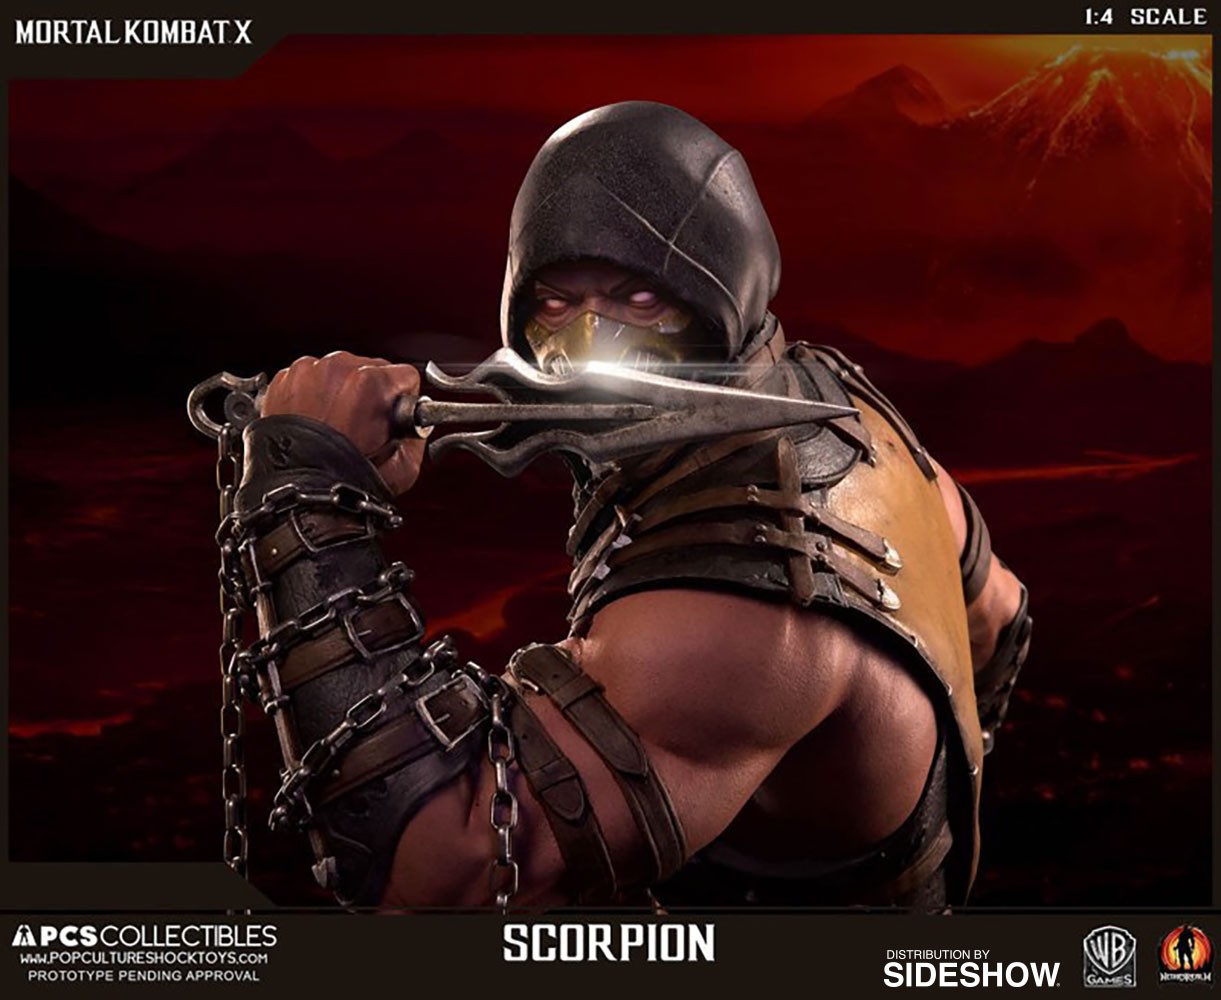 Scorpion Exclusive Edition View 24